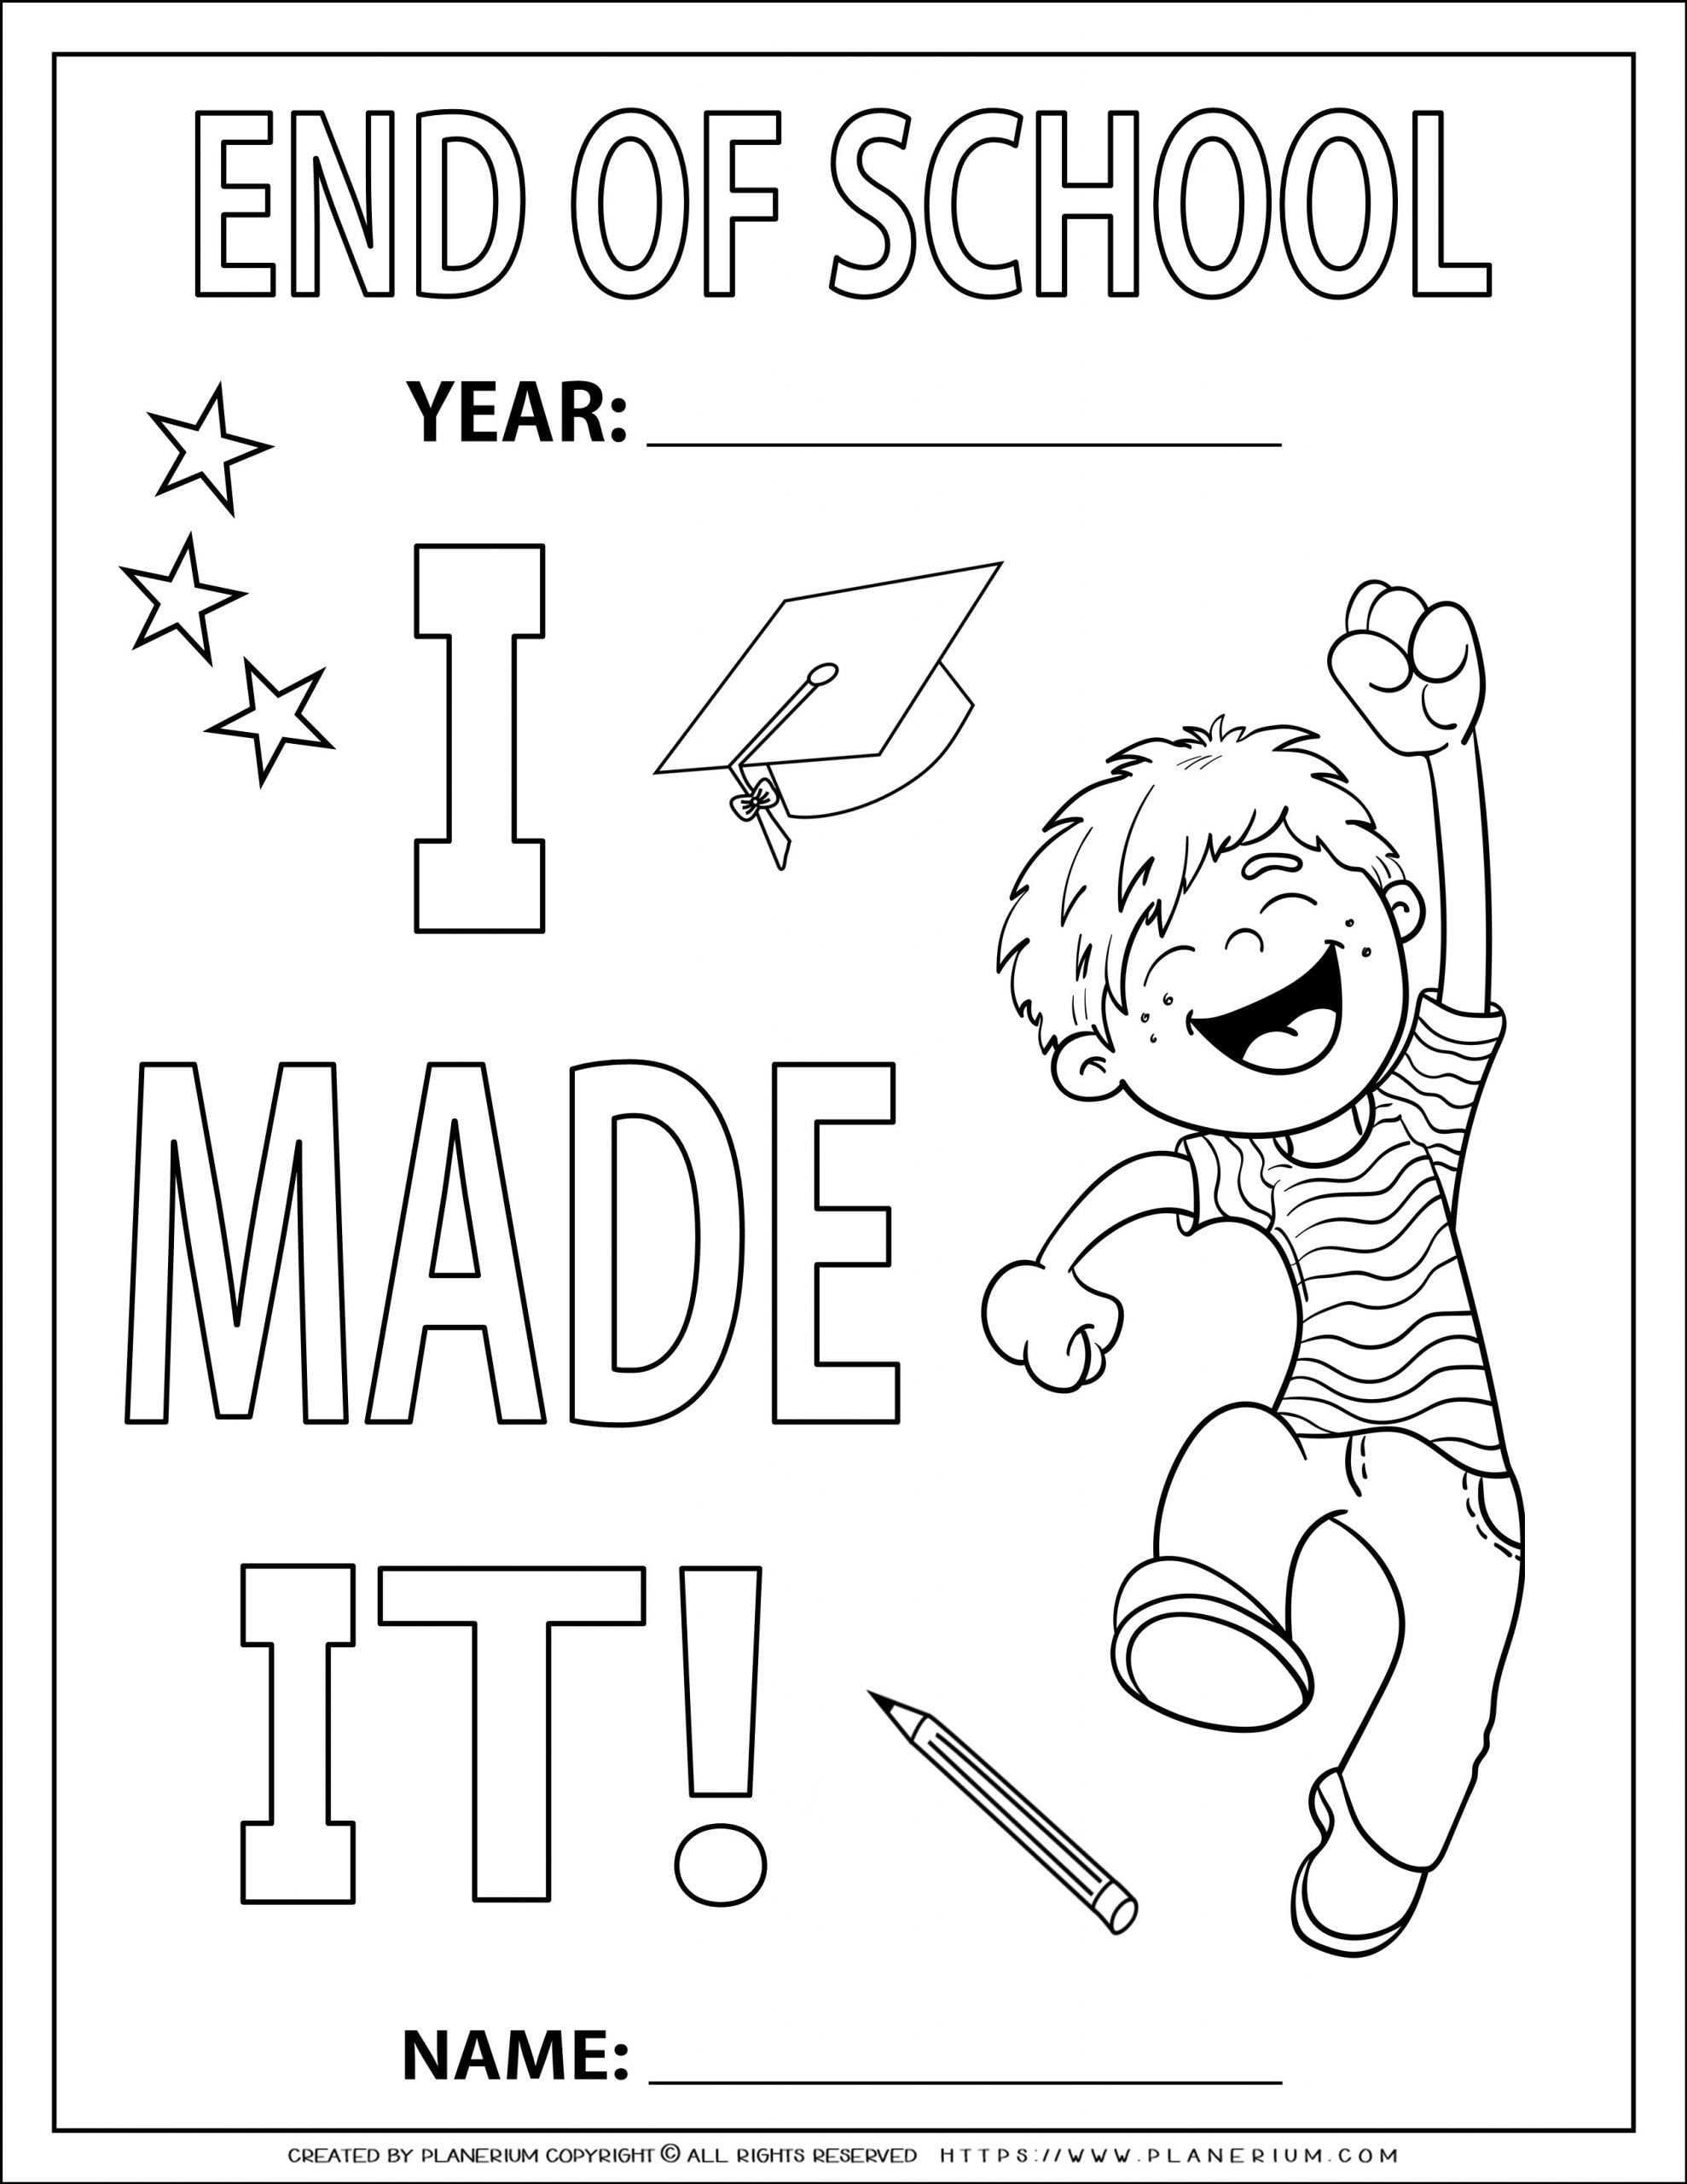 End of Year - Coloring Page - I Made It - Boy